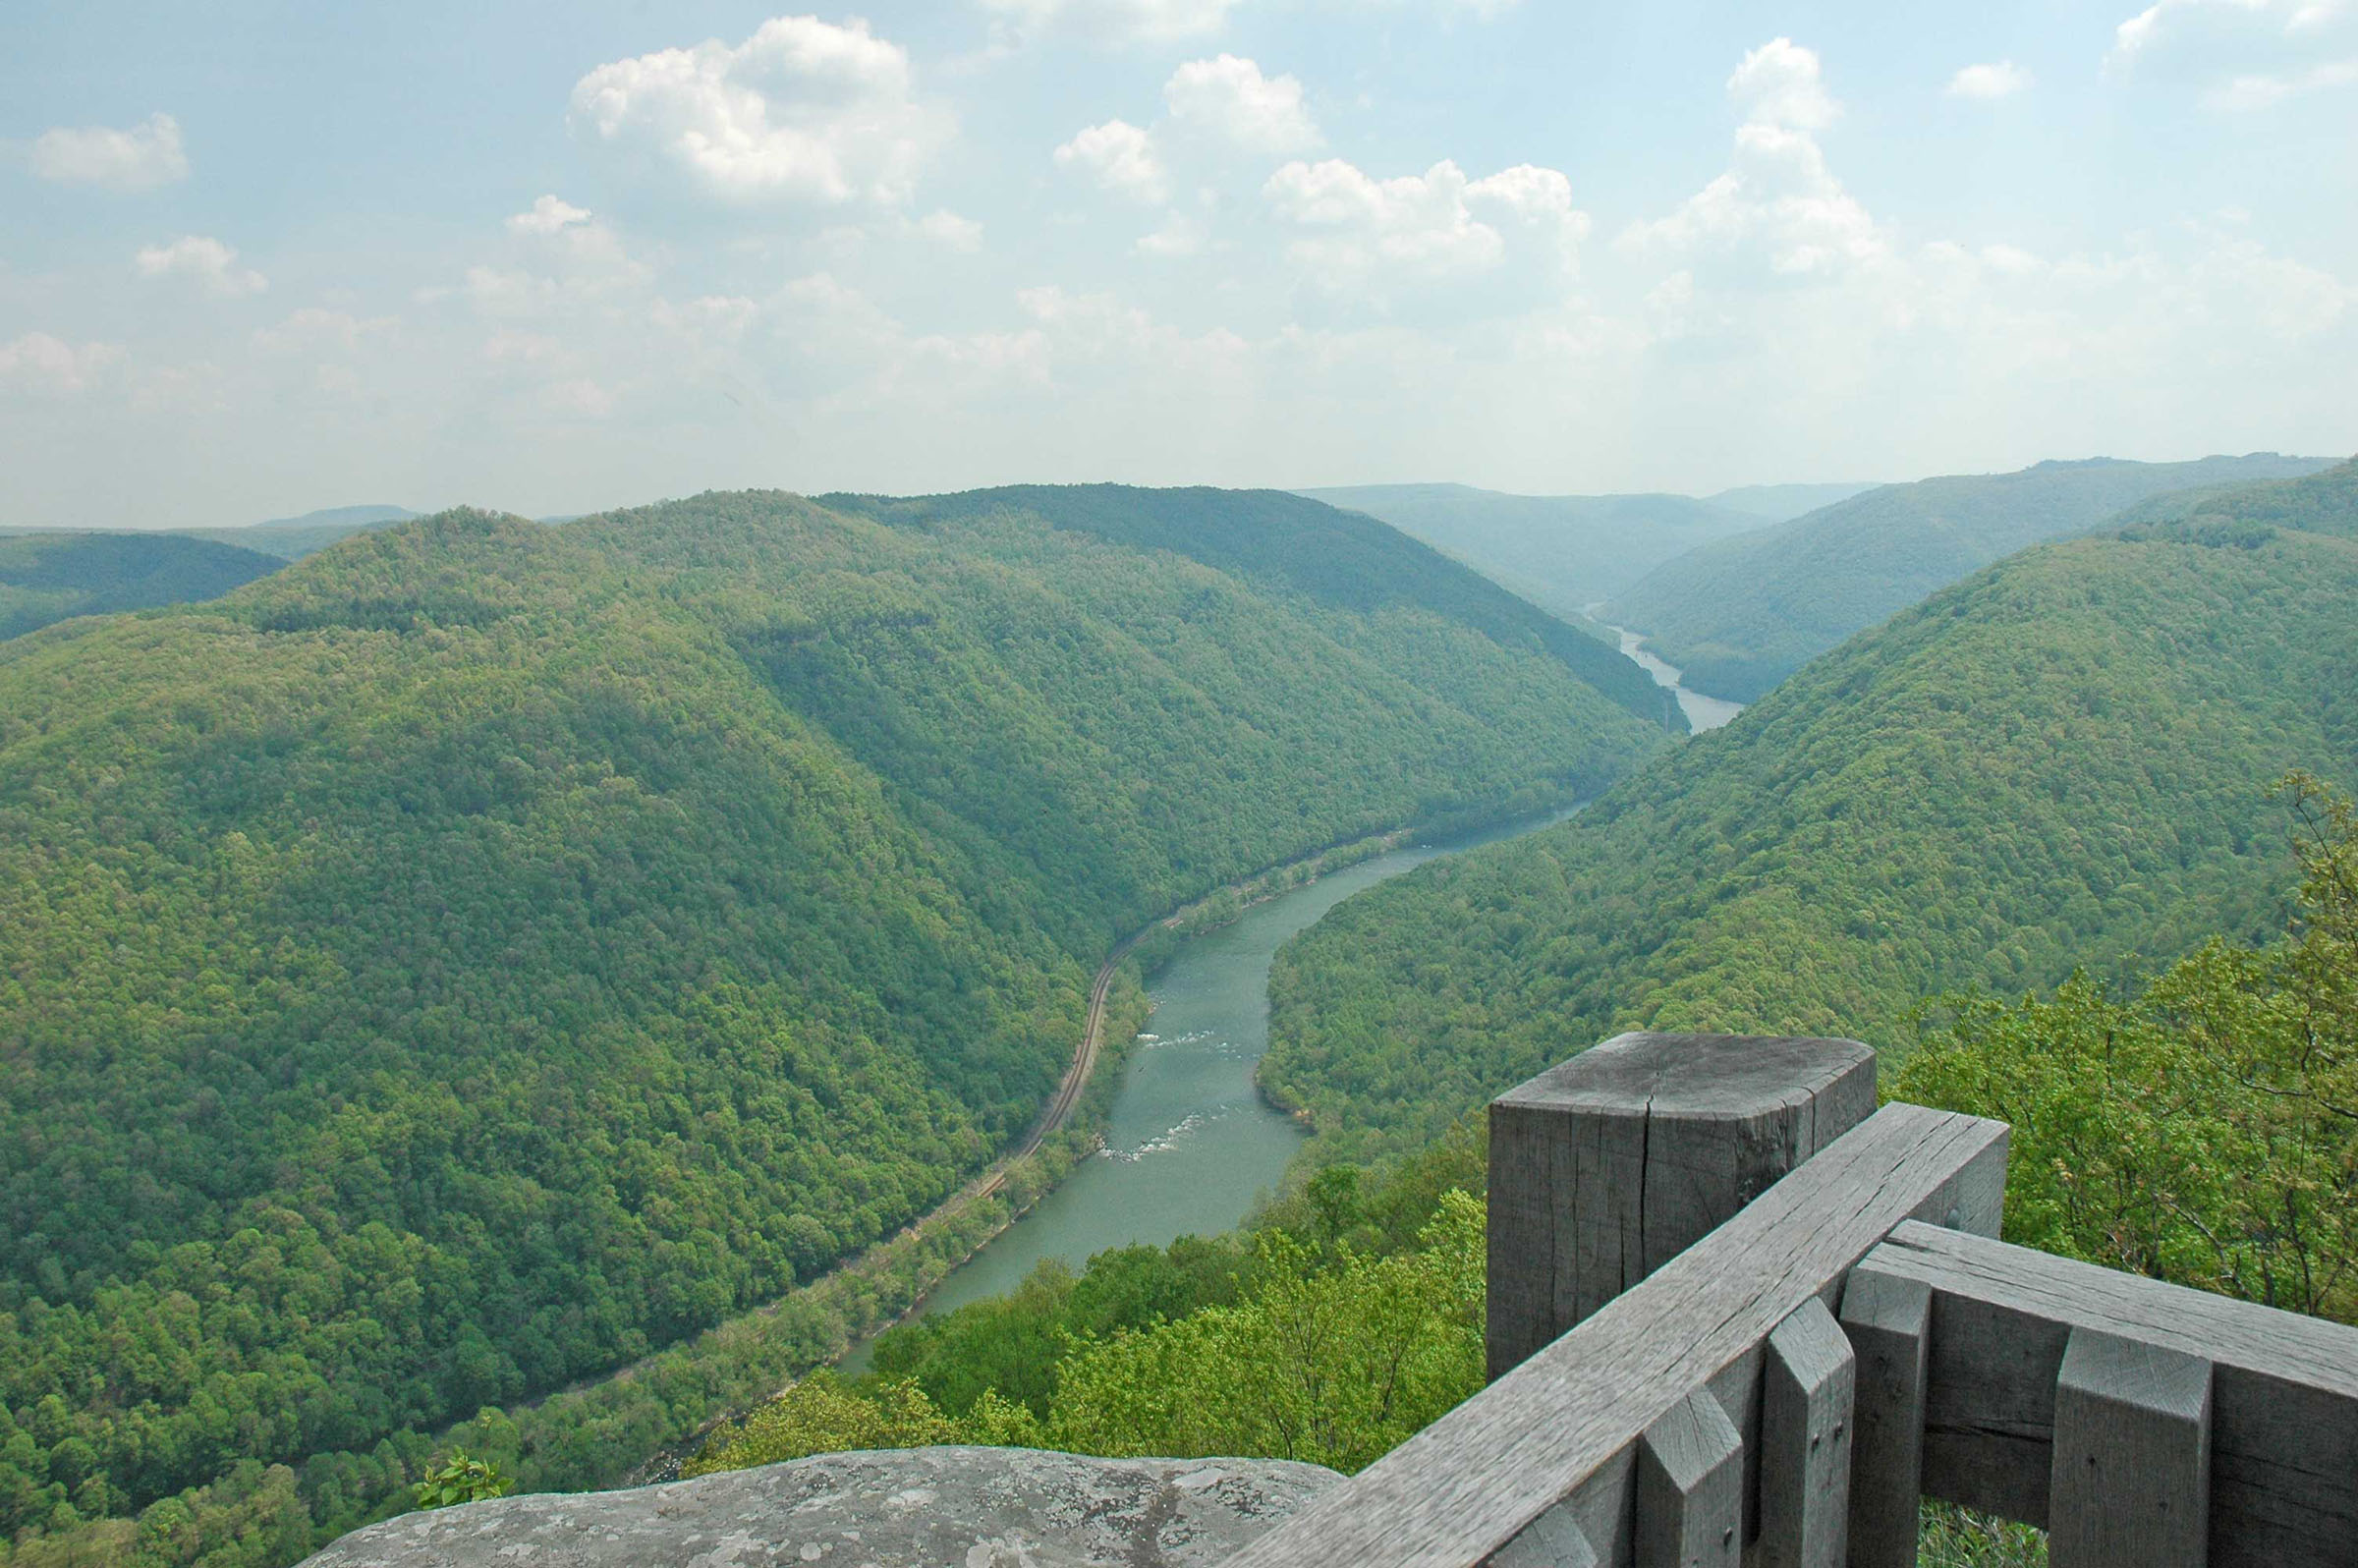 The new river flowing through the deep green slopes of the gorge at Grandview Main Overlook